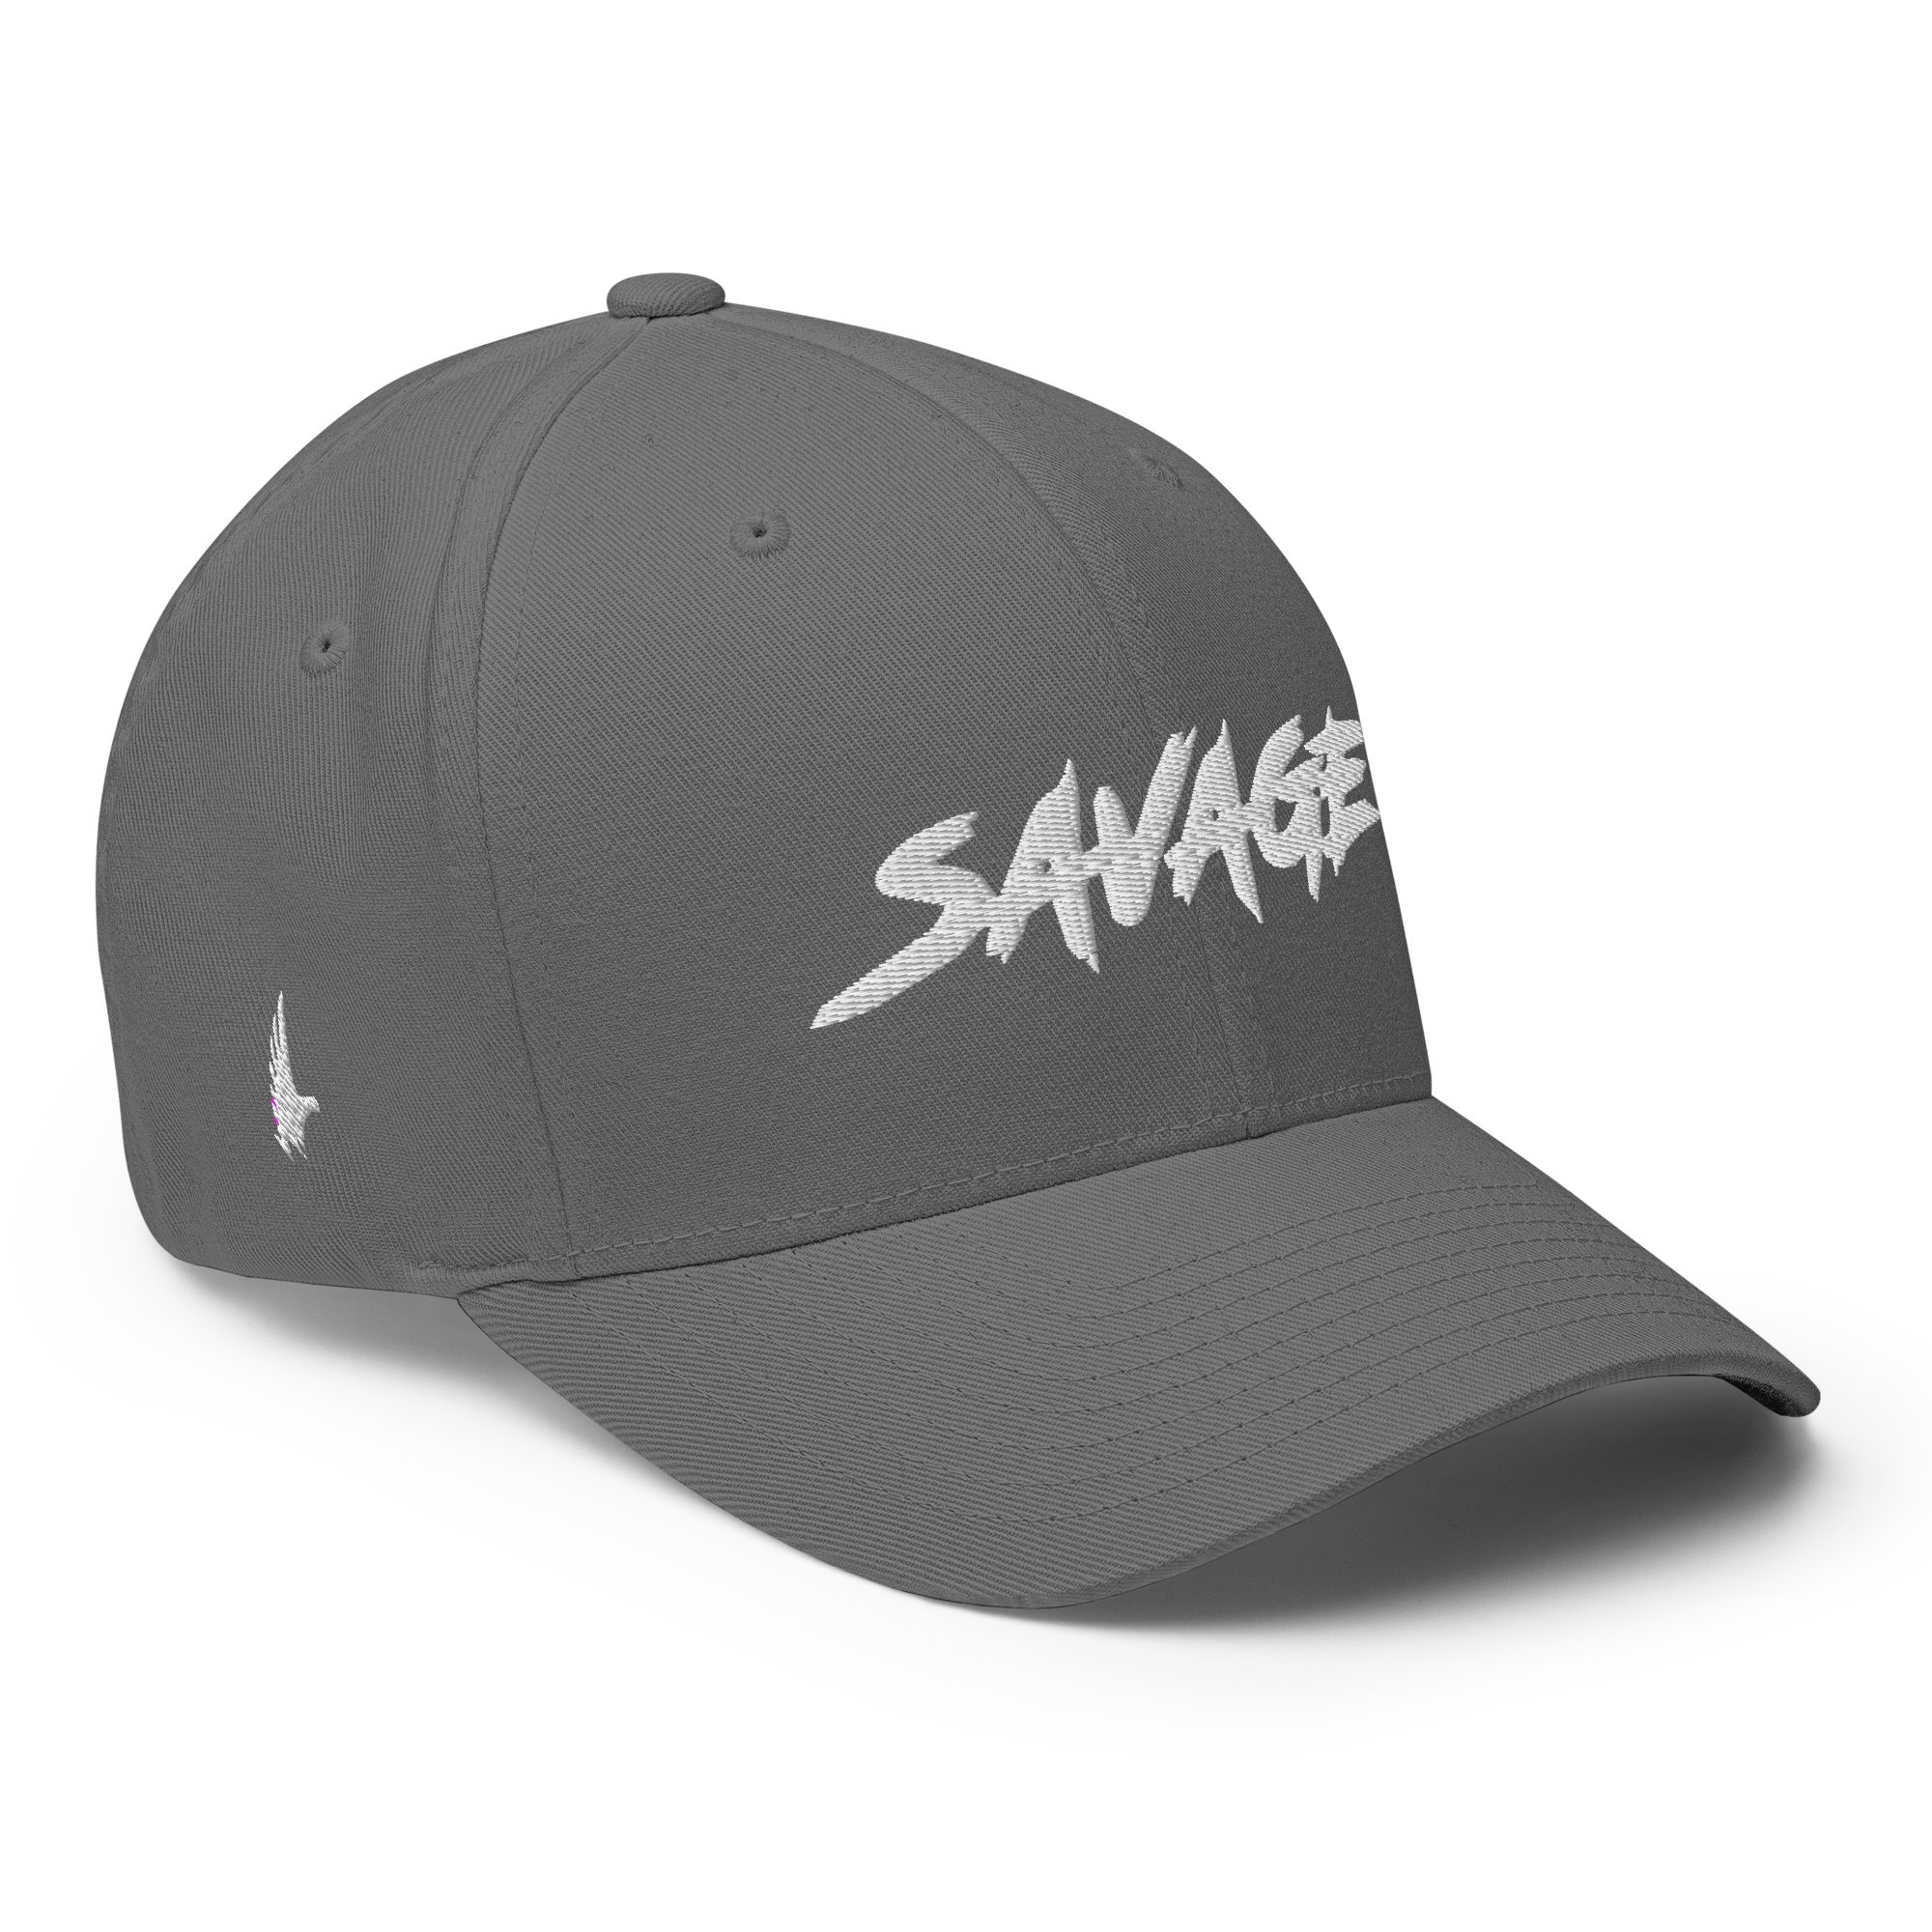 Savage Fitted Hat Grey - Loyalty Vibes